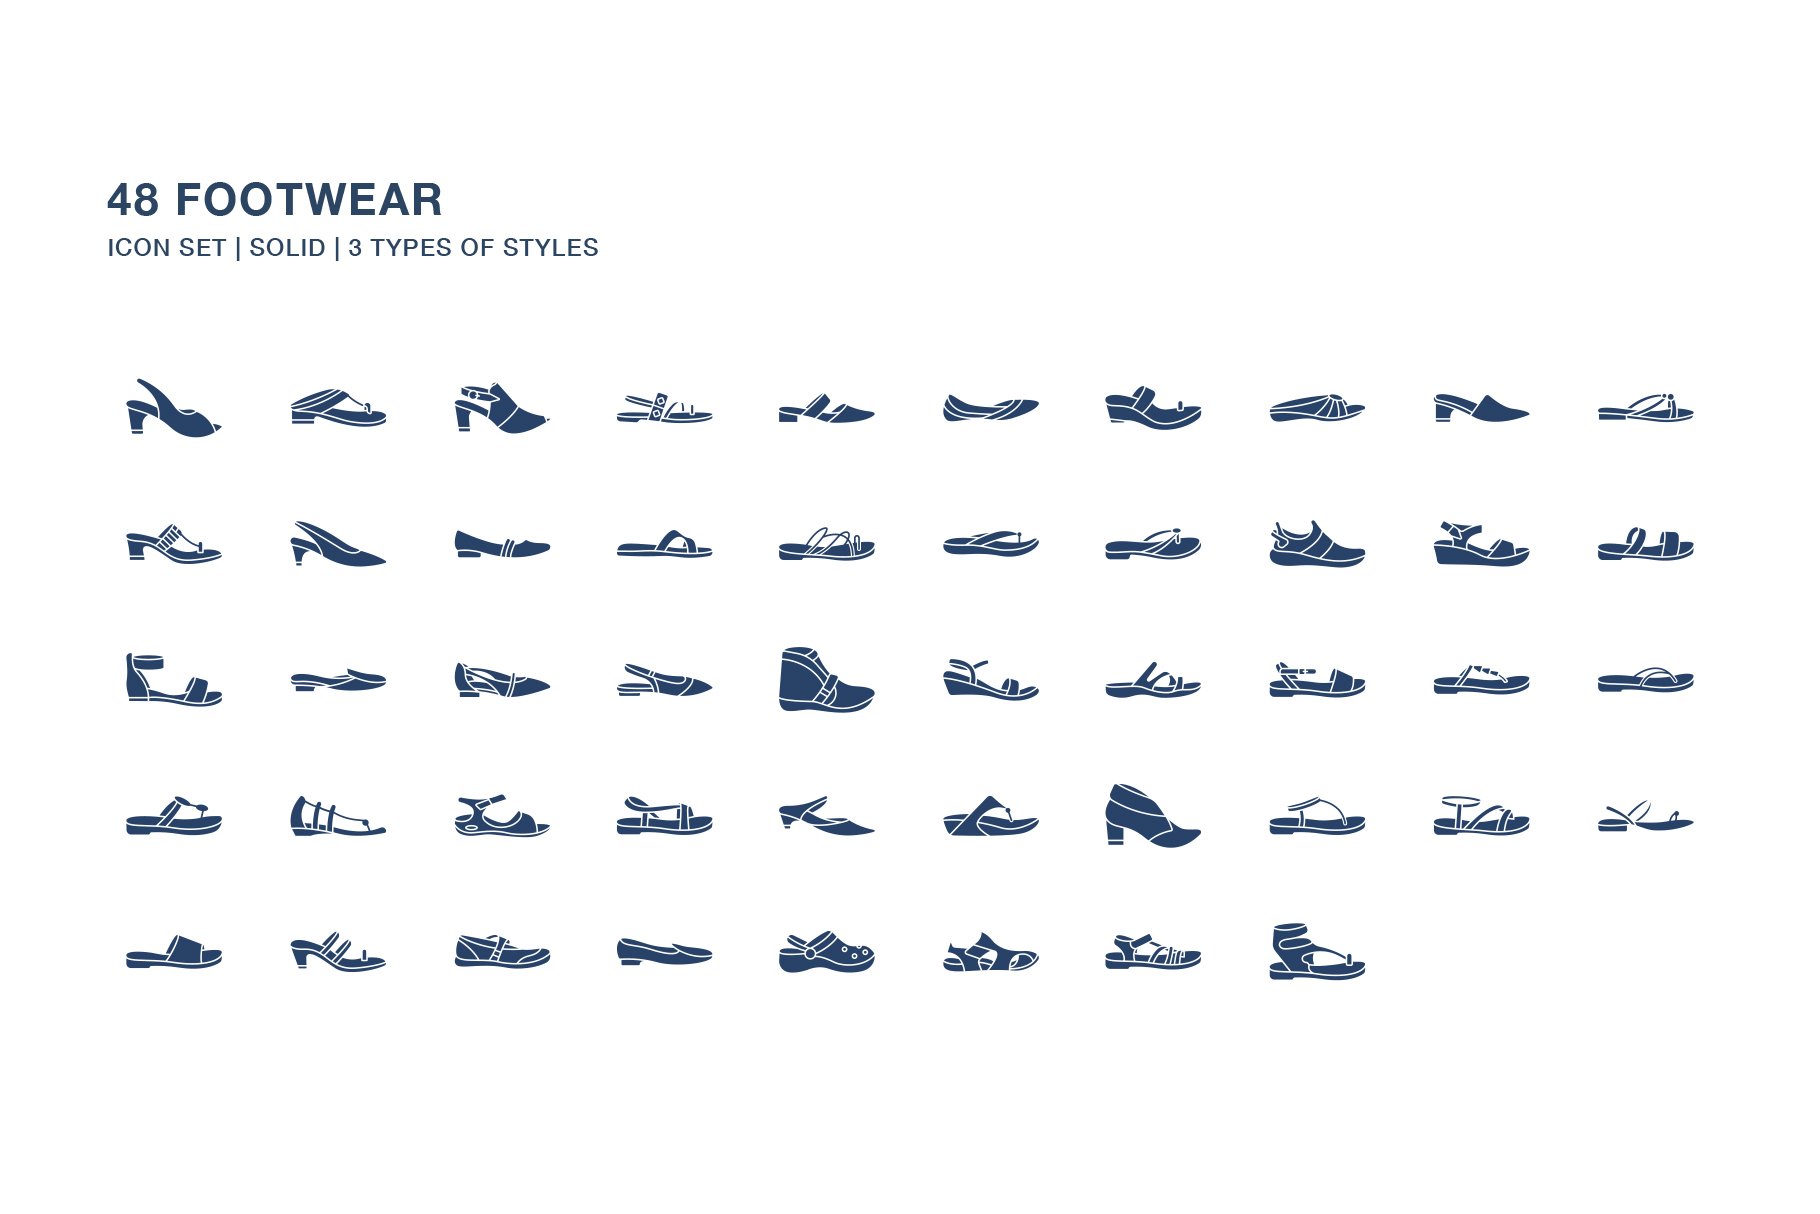 Sandals and Footwear icon set preview image.